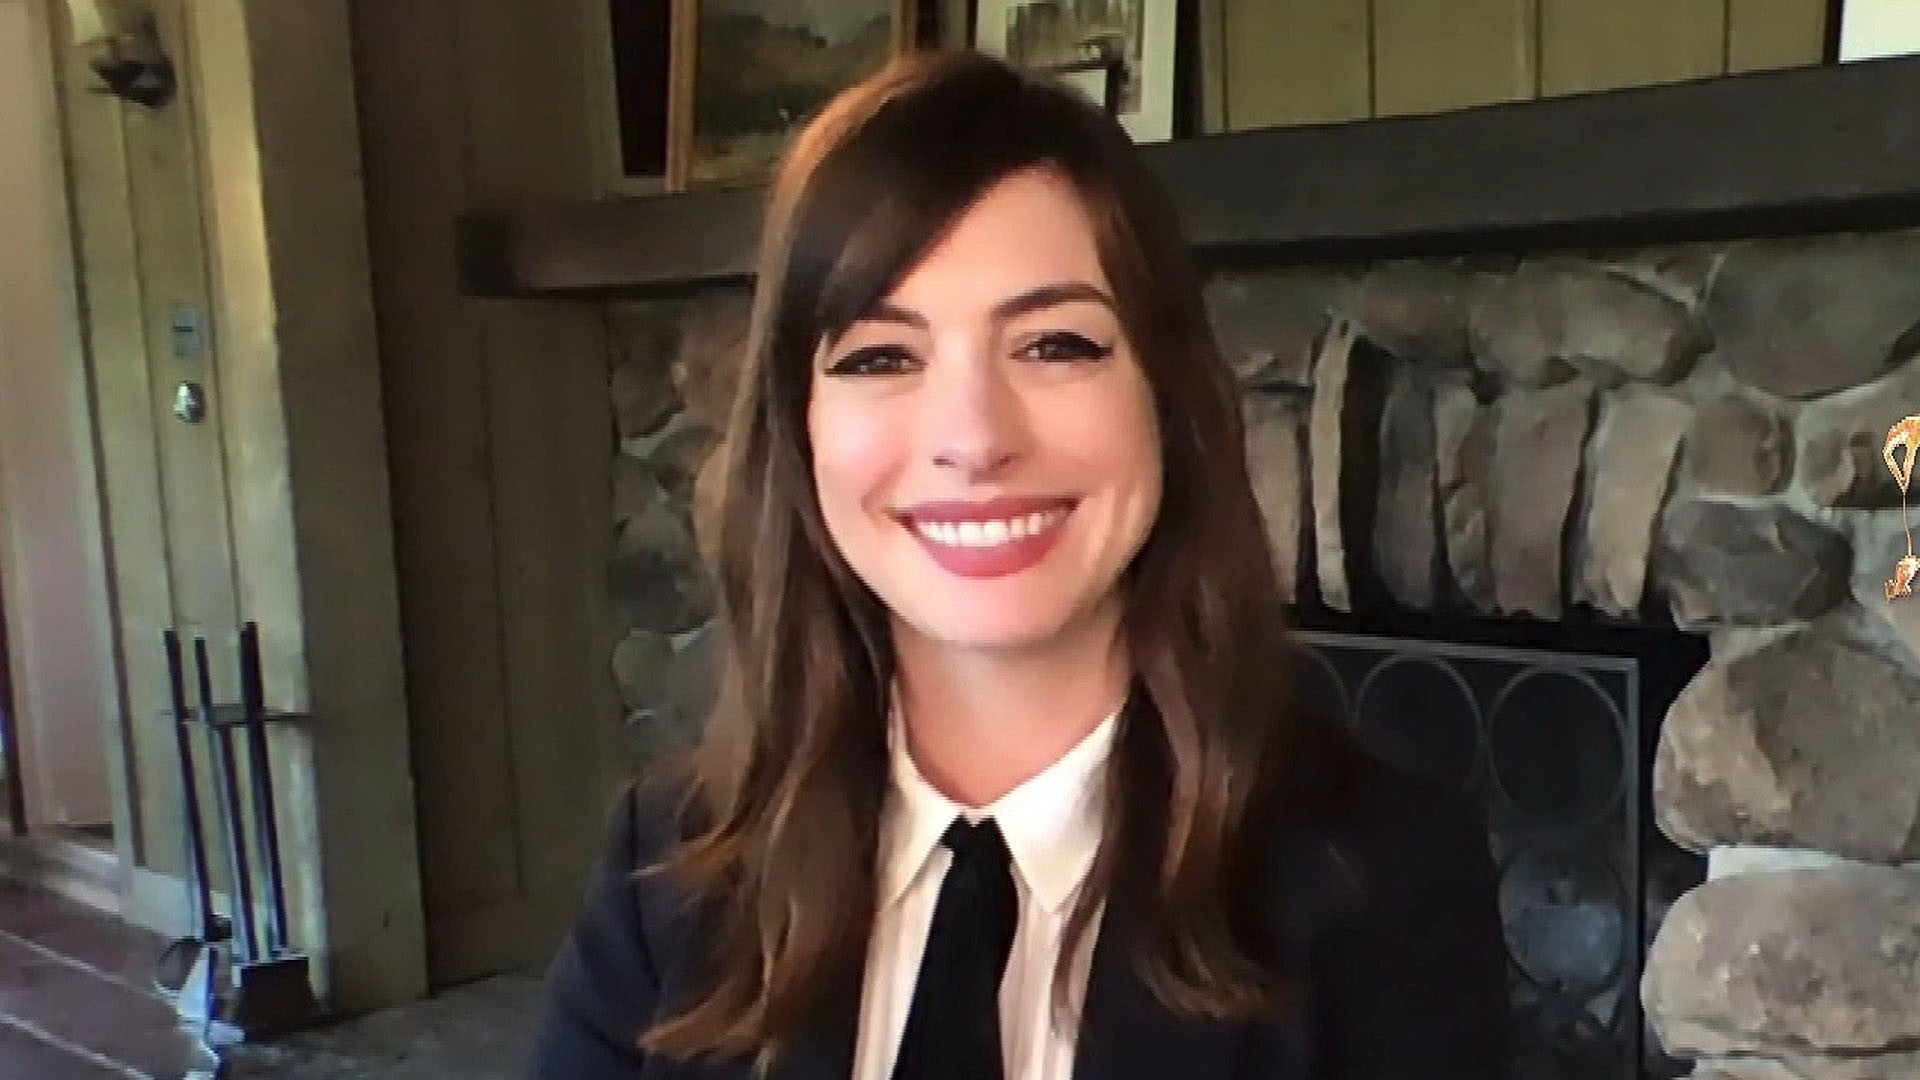 Anne Hathaway Porn Fake Tits - Anne Hathaway on Keeping Her Pregnancy a Secret While Filming 'The Witches'  (Exclusive)